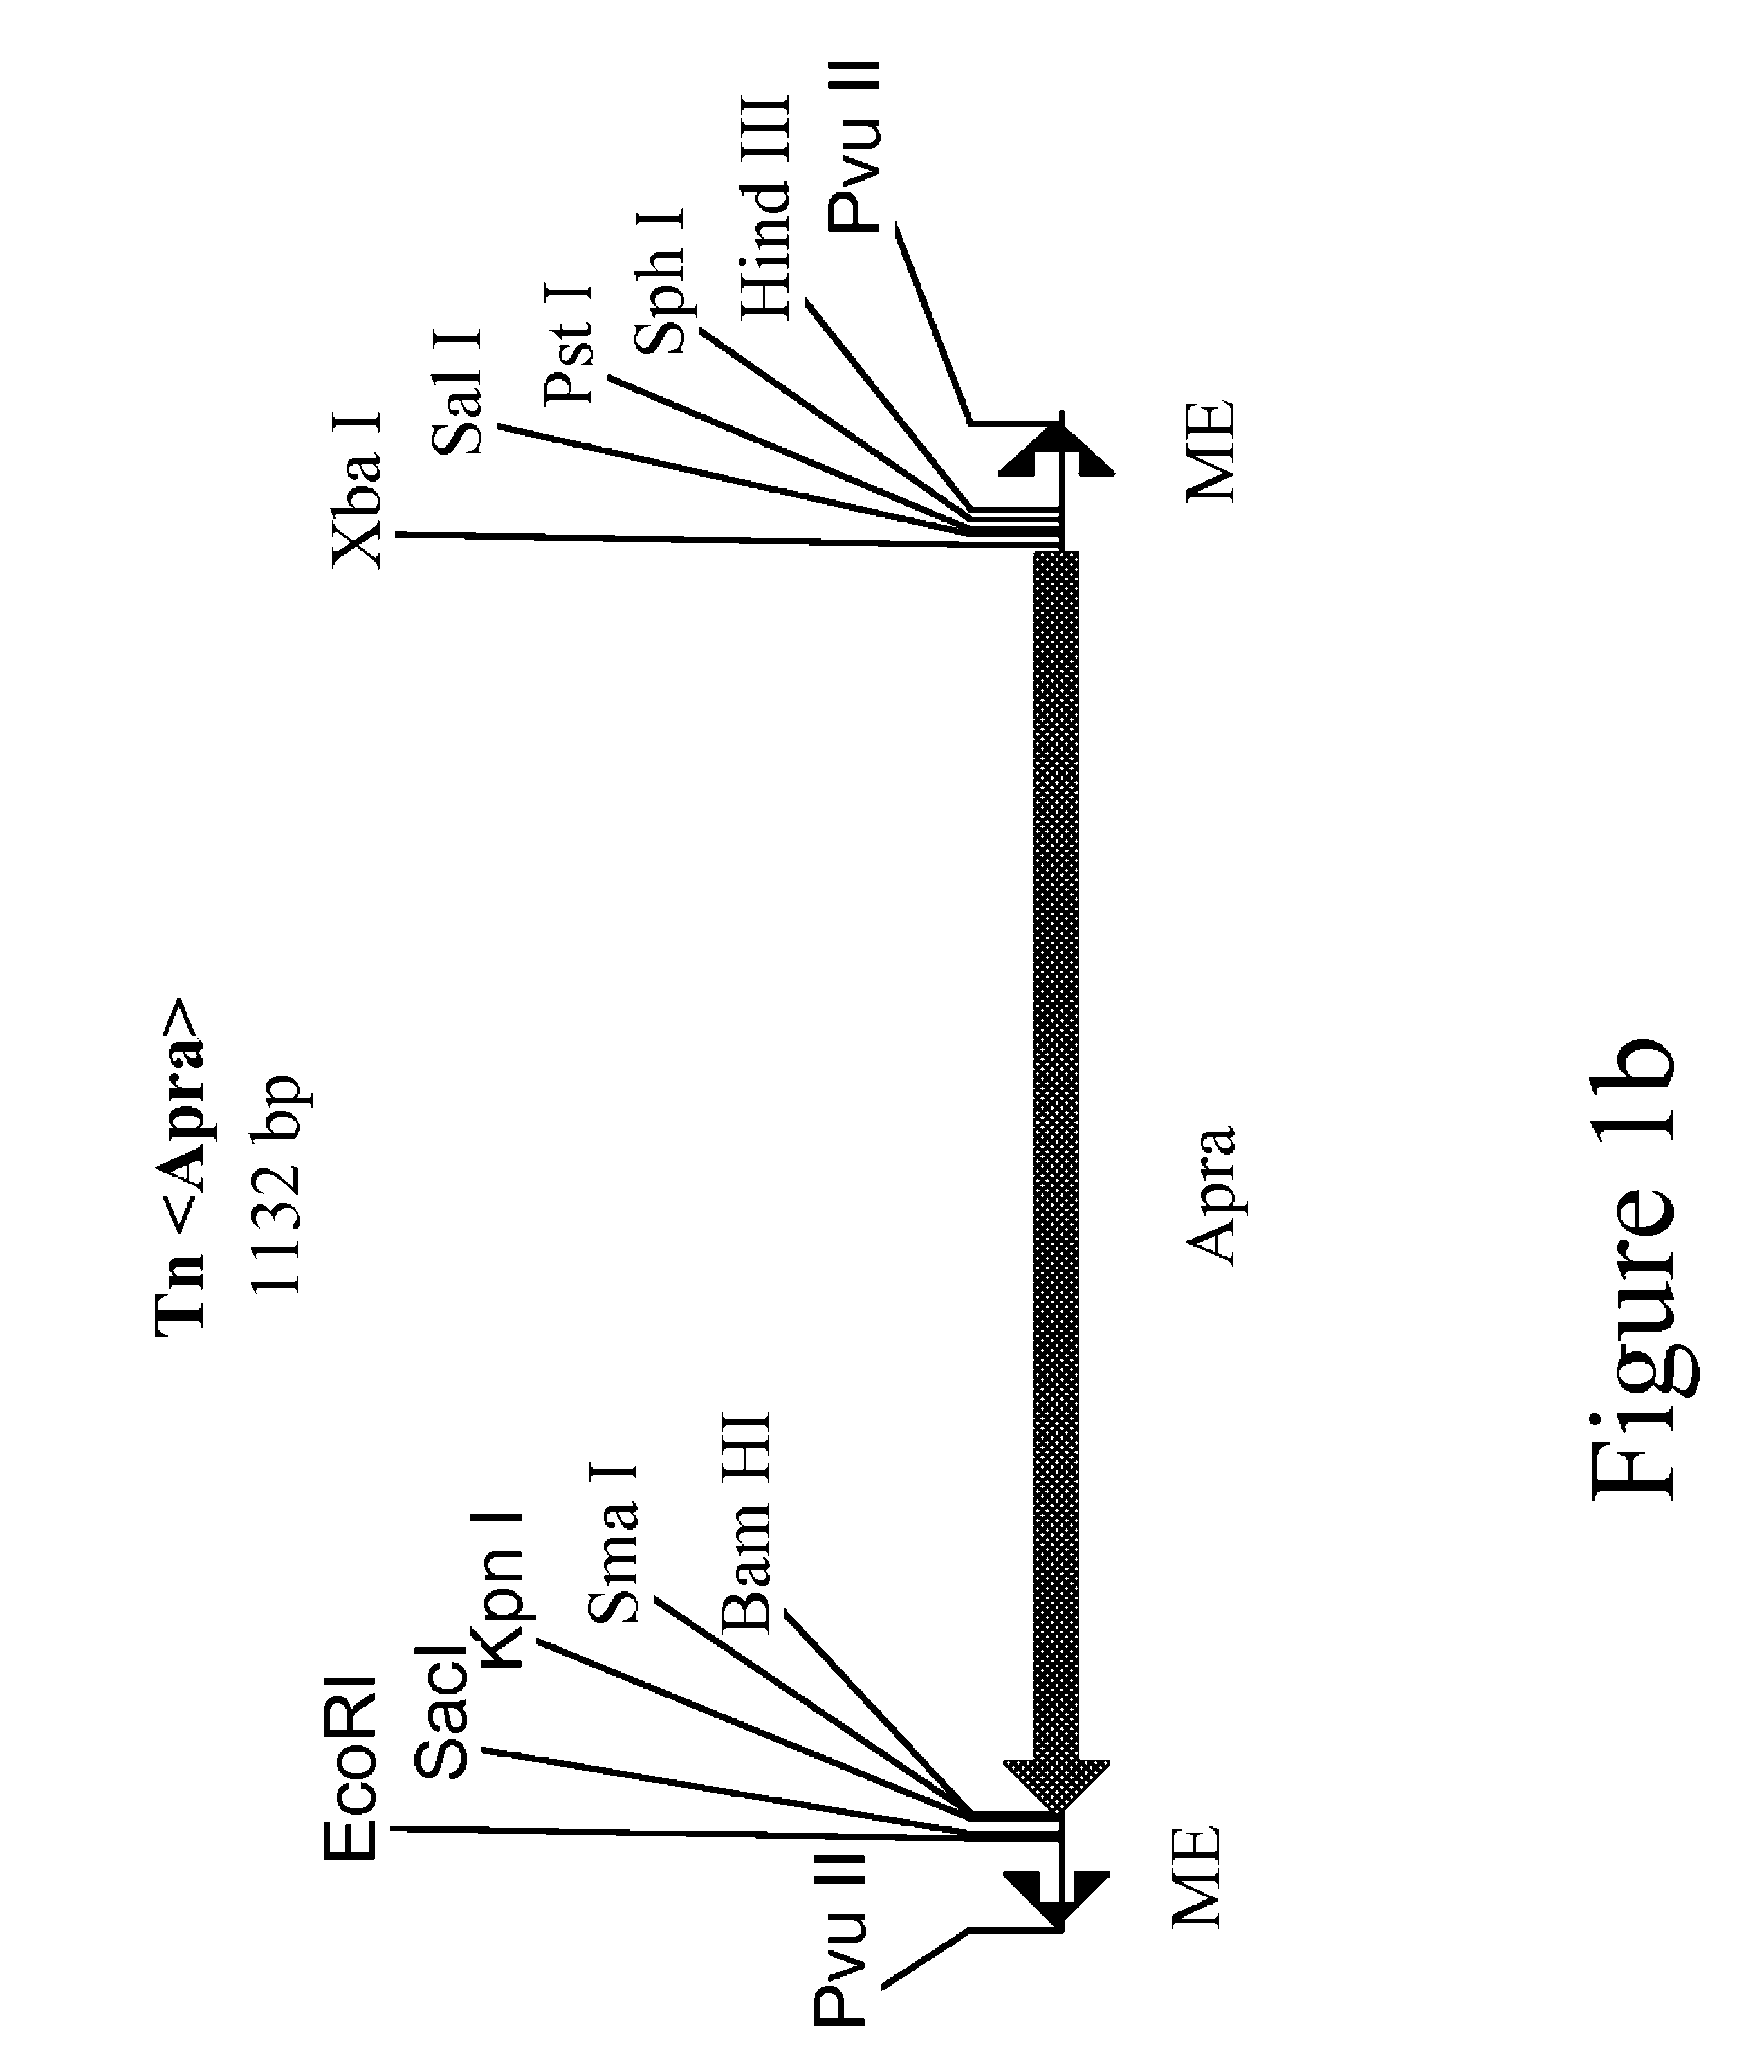 Method for the expression of unknown environmental DNA into adapted host cells